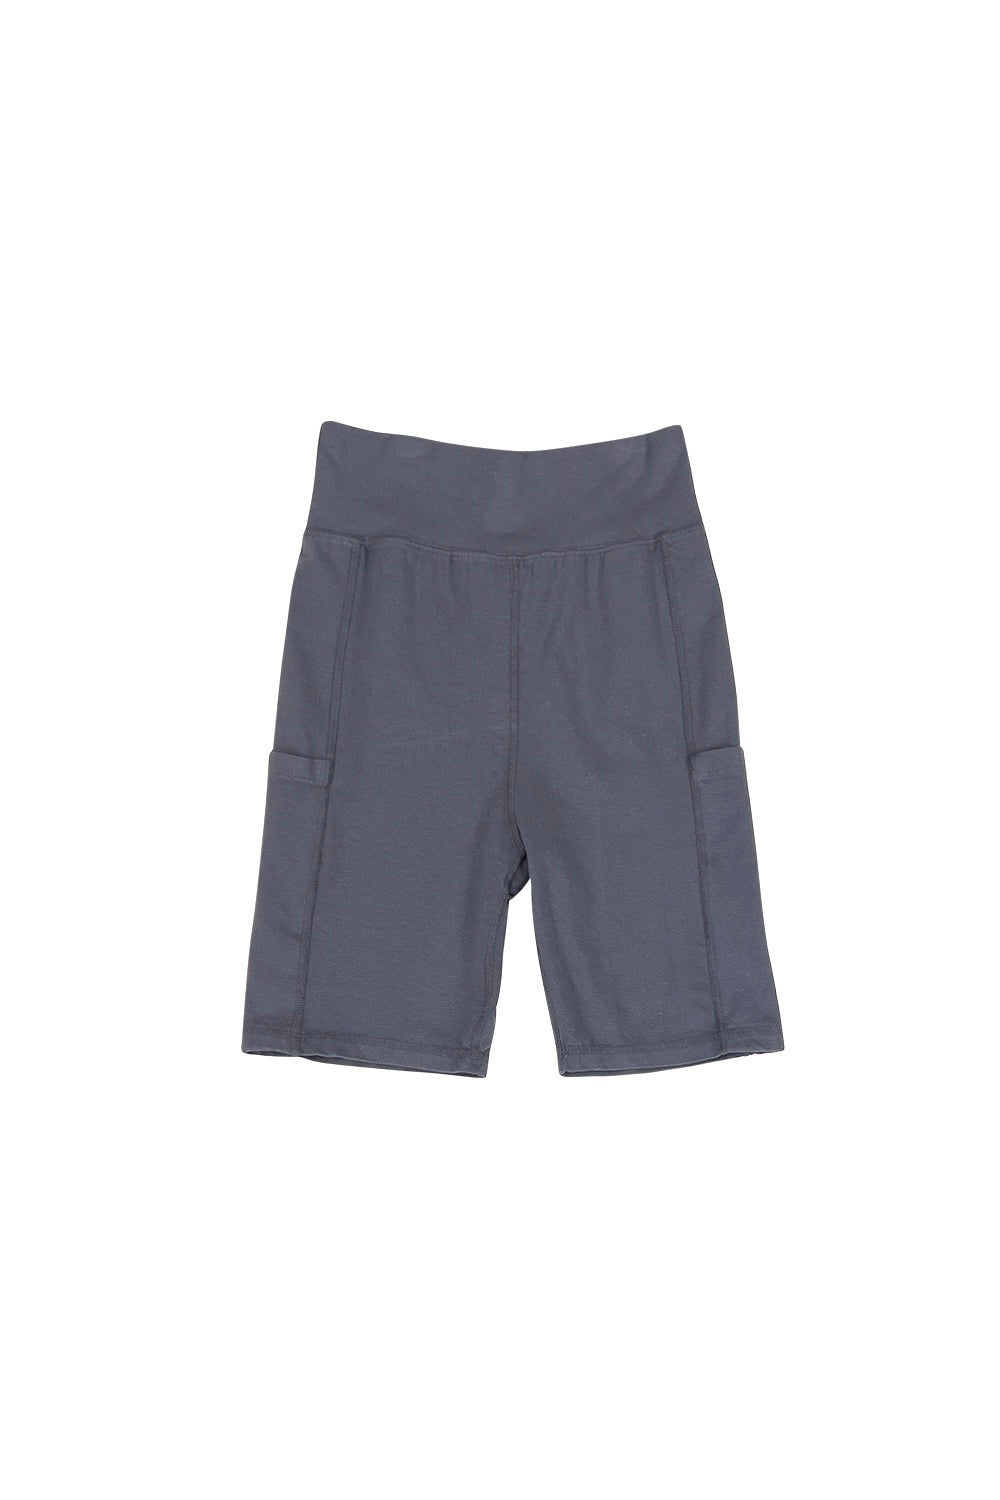 Bike Short with Pockets | Jungmaven Hemp Clothing & Accessories / Color: Diesel Gray